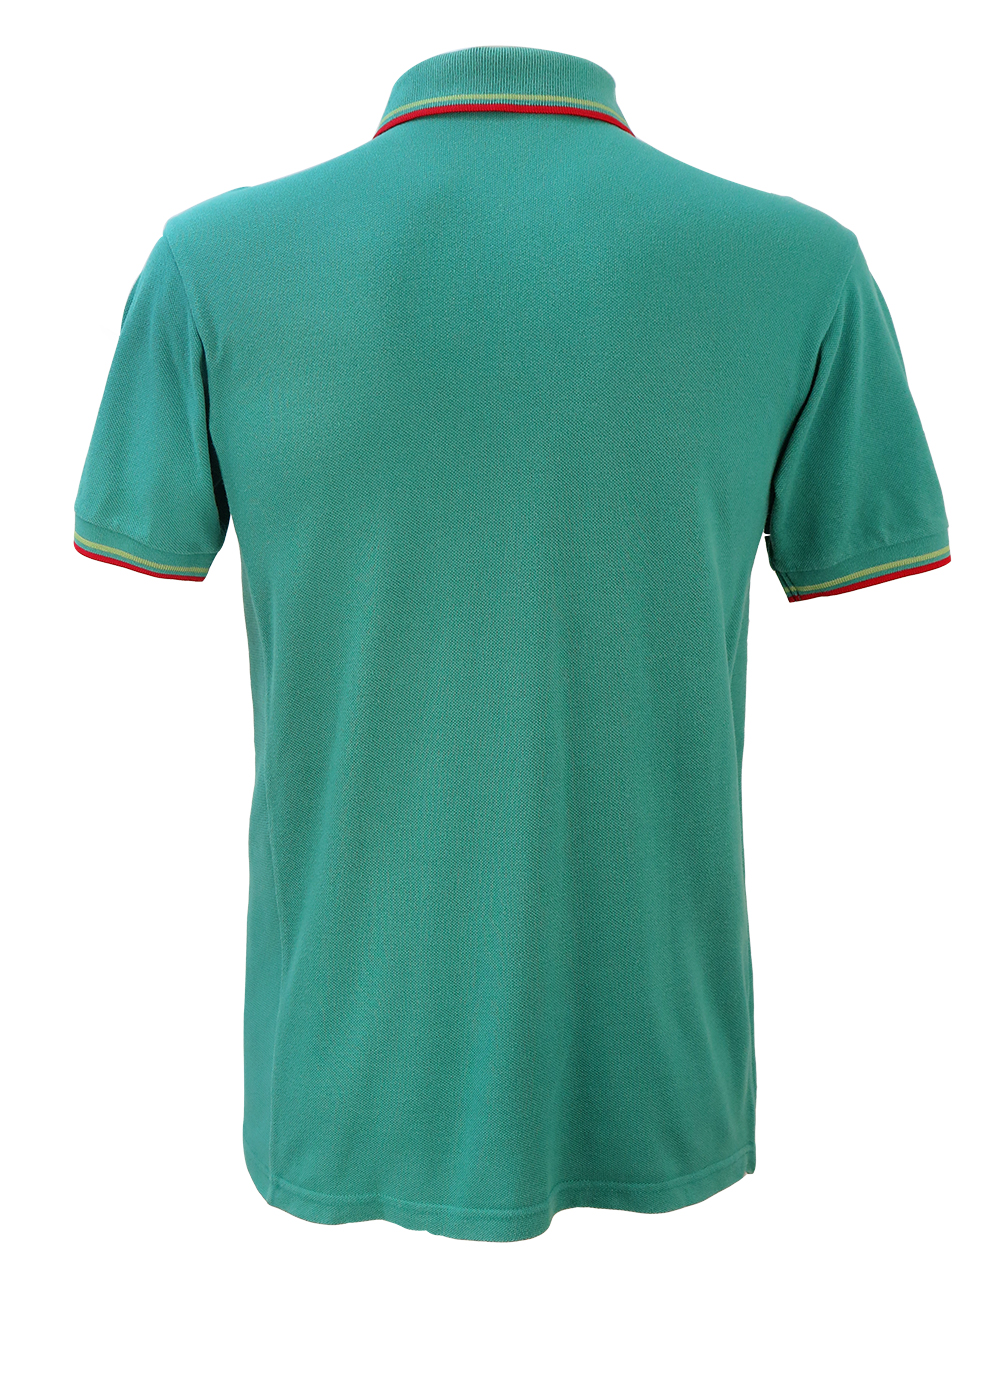 Fred Perry Comme des Garcons Jade Green Polo Shirt - S/M | Reign Vintage